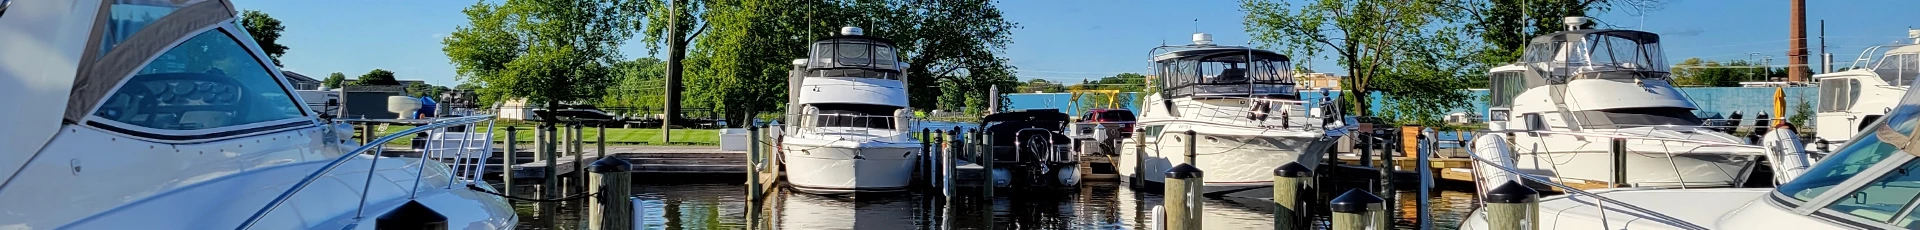 Boat Removal, Dismantle and Disposal in Prairie du Chien Wisconsin